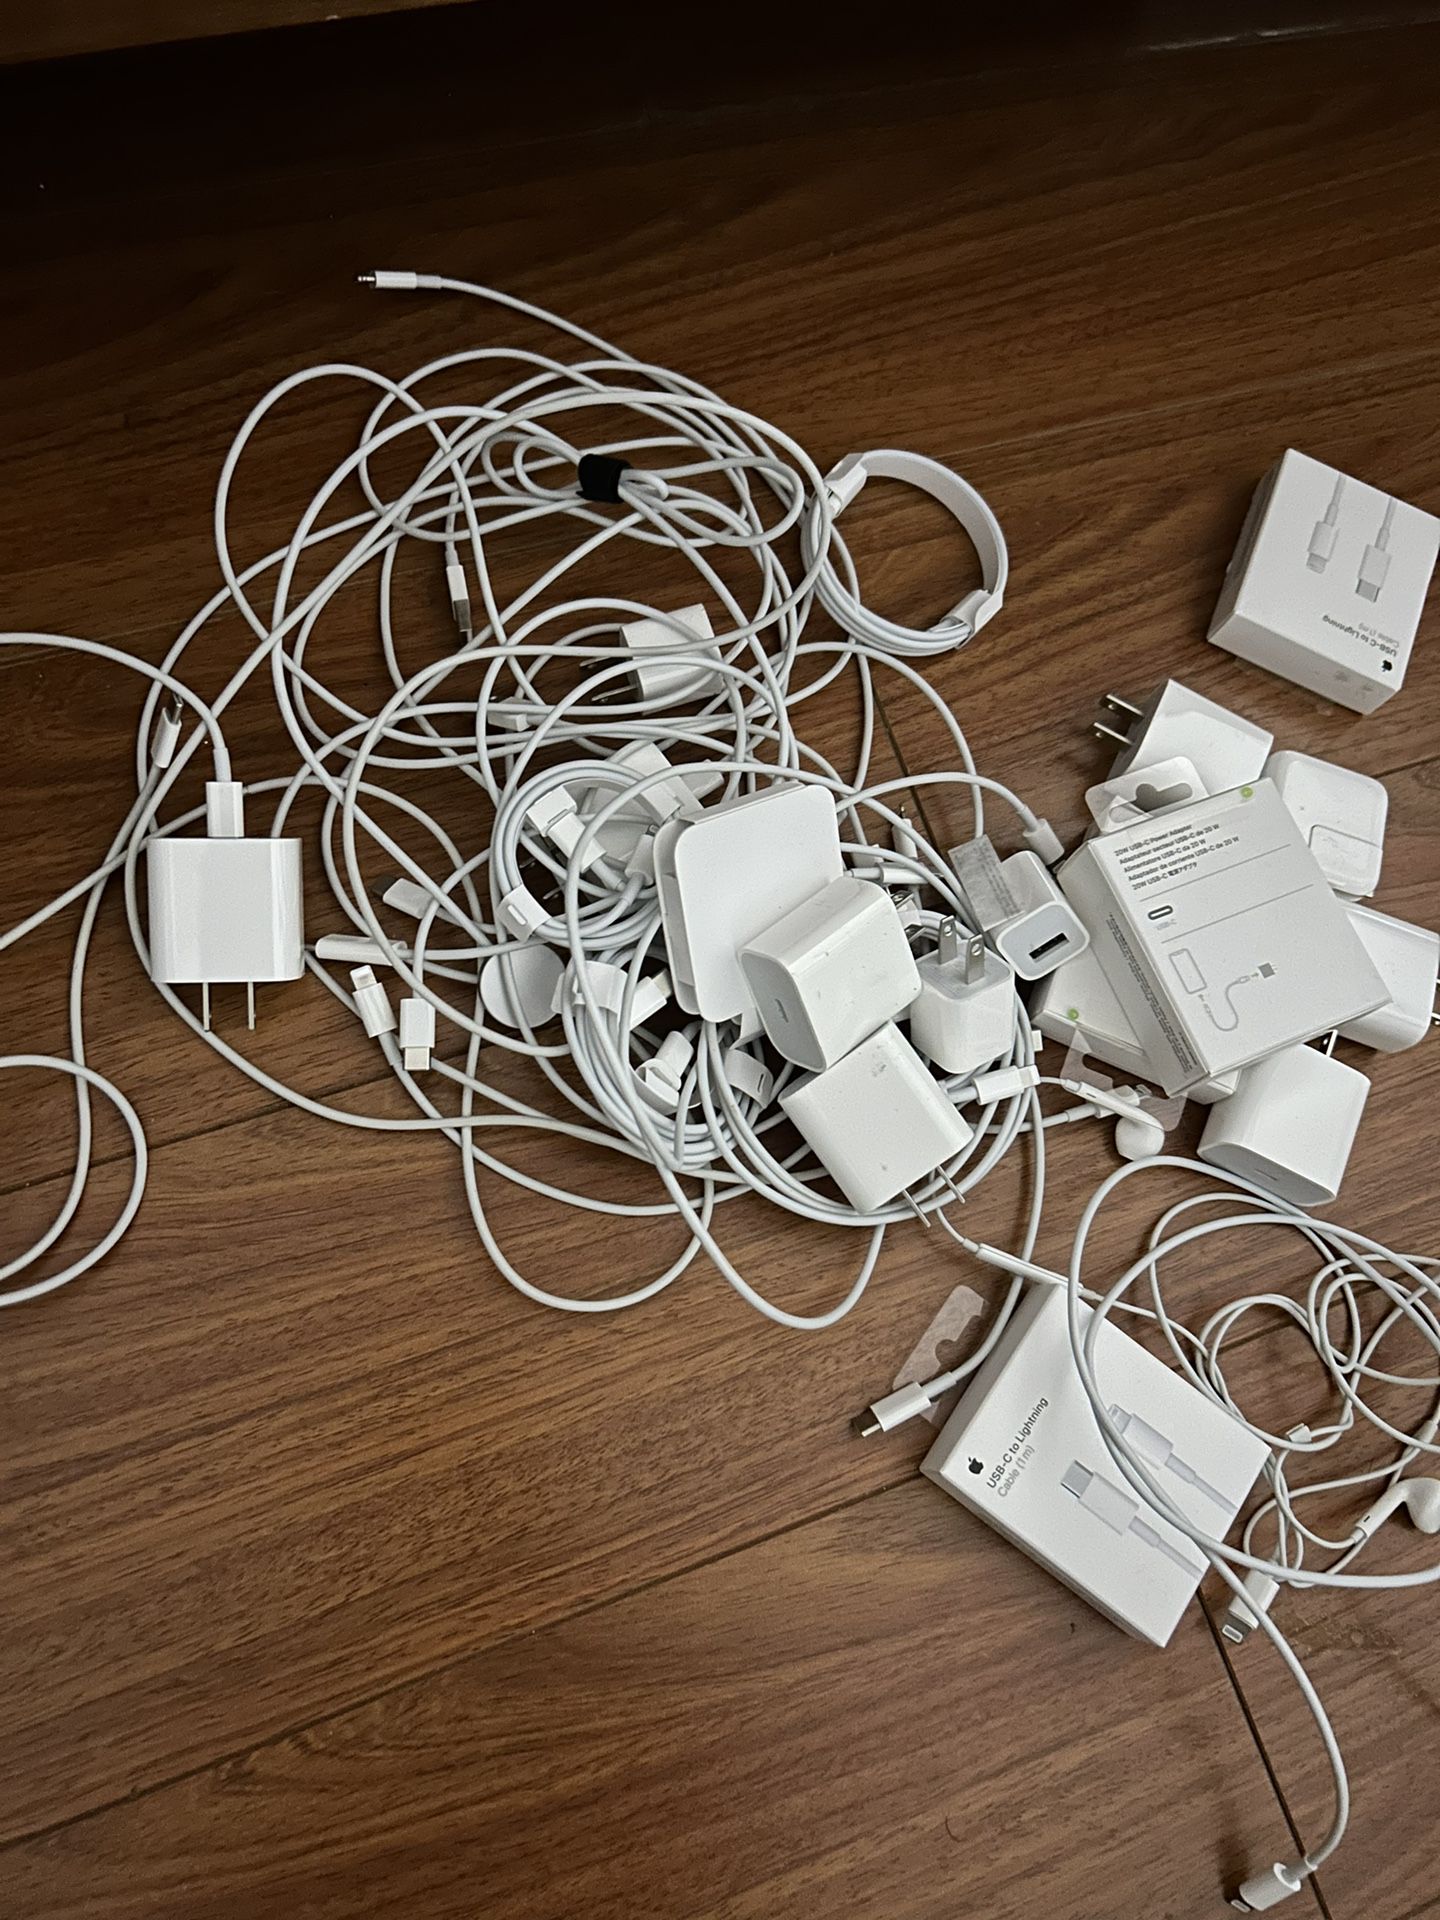 iPad/iPhone Chargers